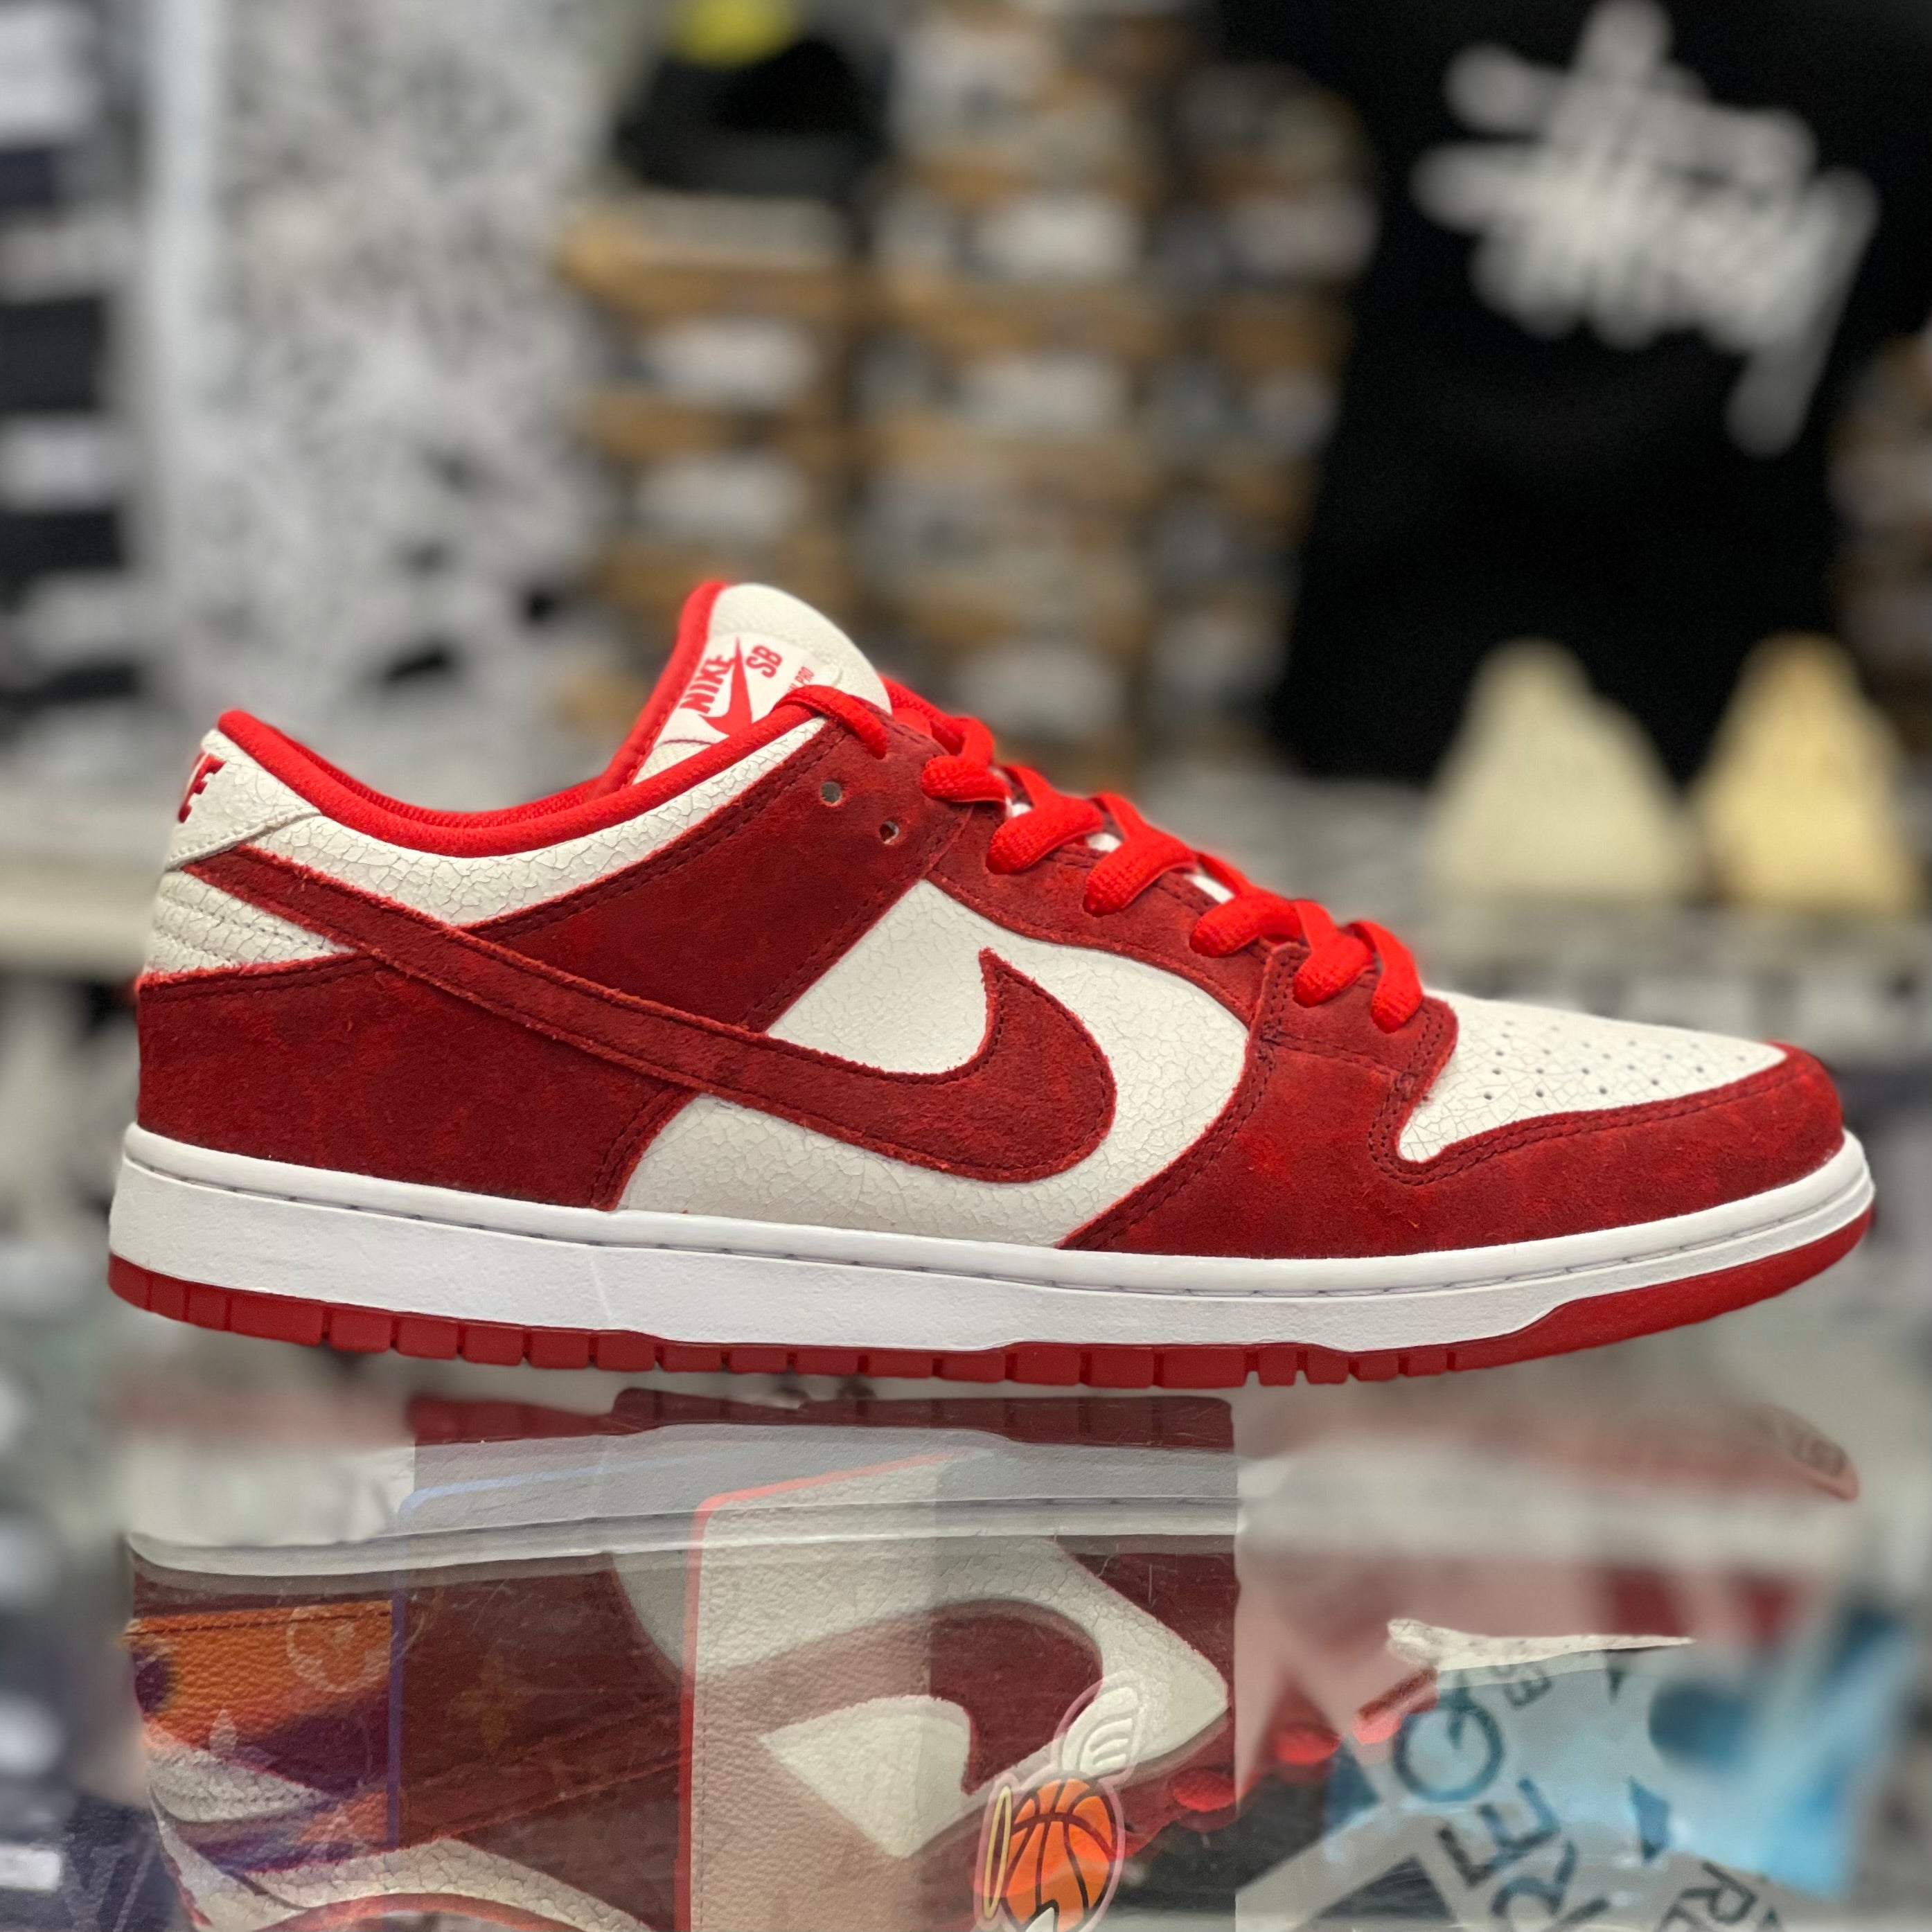 Nike Dunk SB Low “Valentines Day 2014”